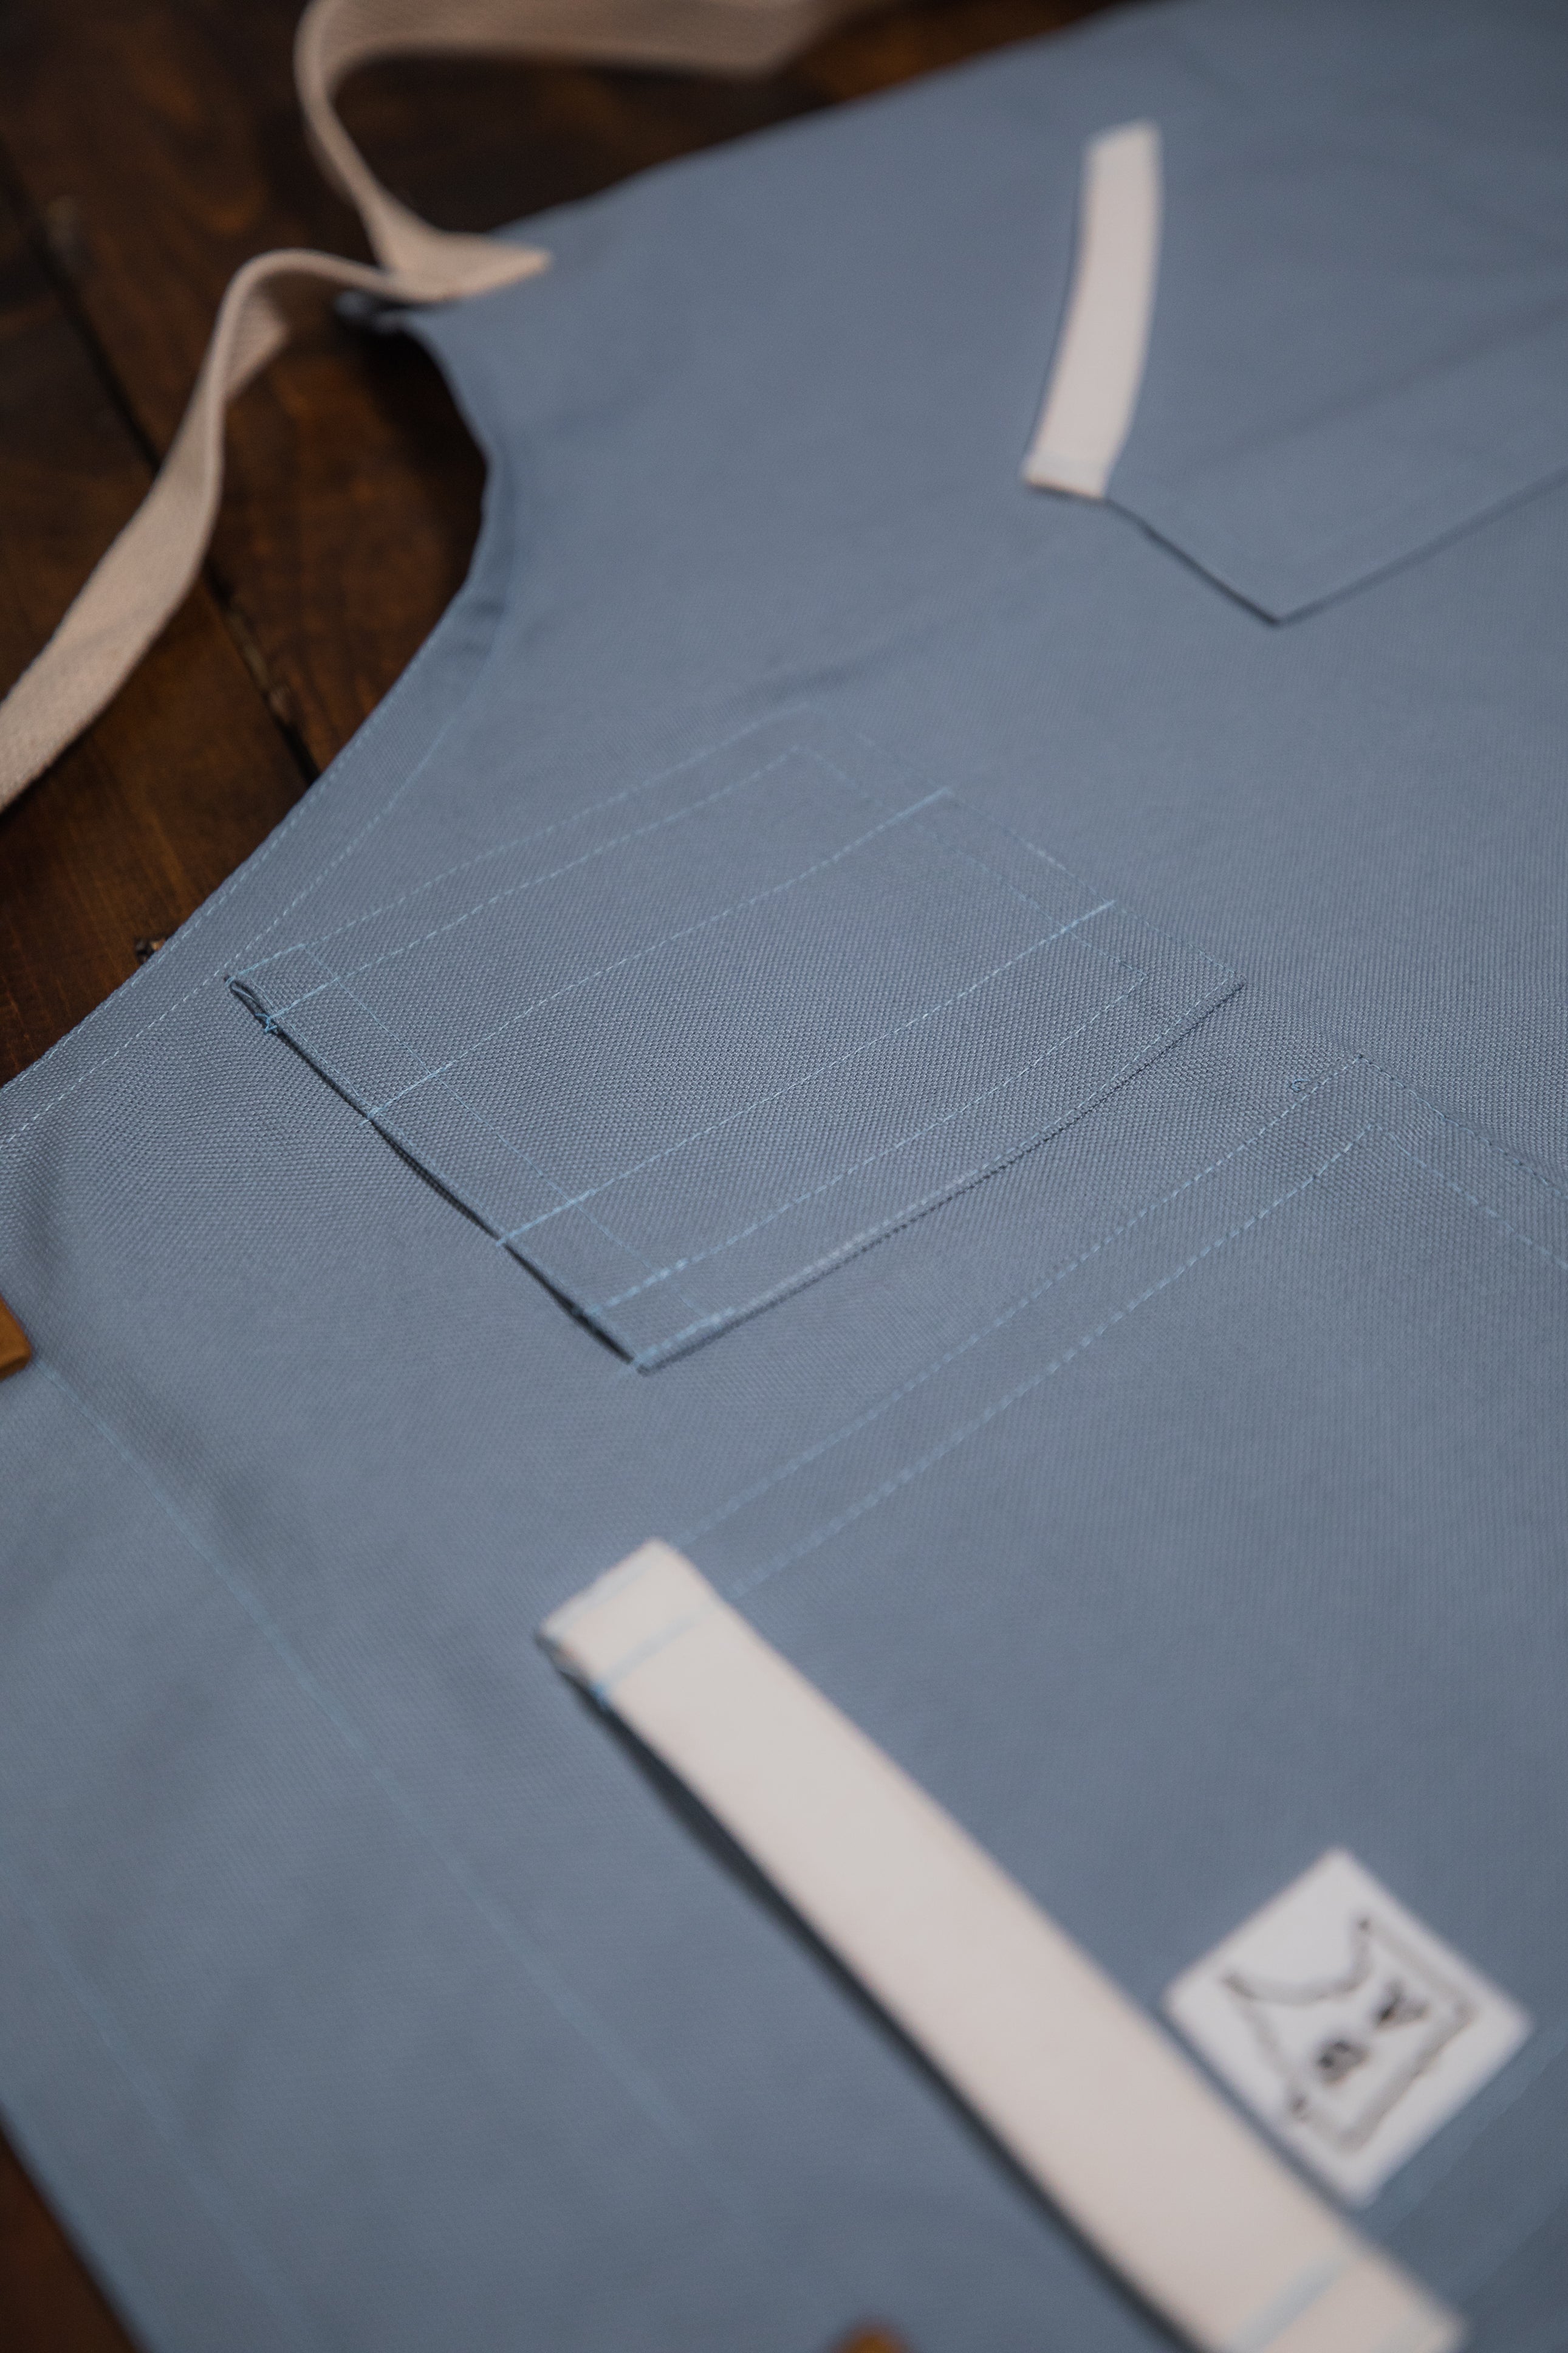 Product shot of Blue Opal cotton apron displaying the pen holder pockets on the left side of the chest. Produced by Craftmade Aprons, Minnesota.